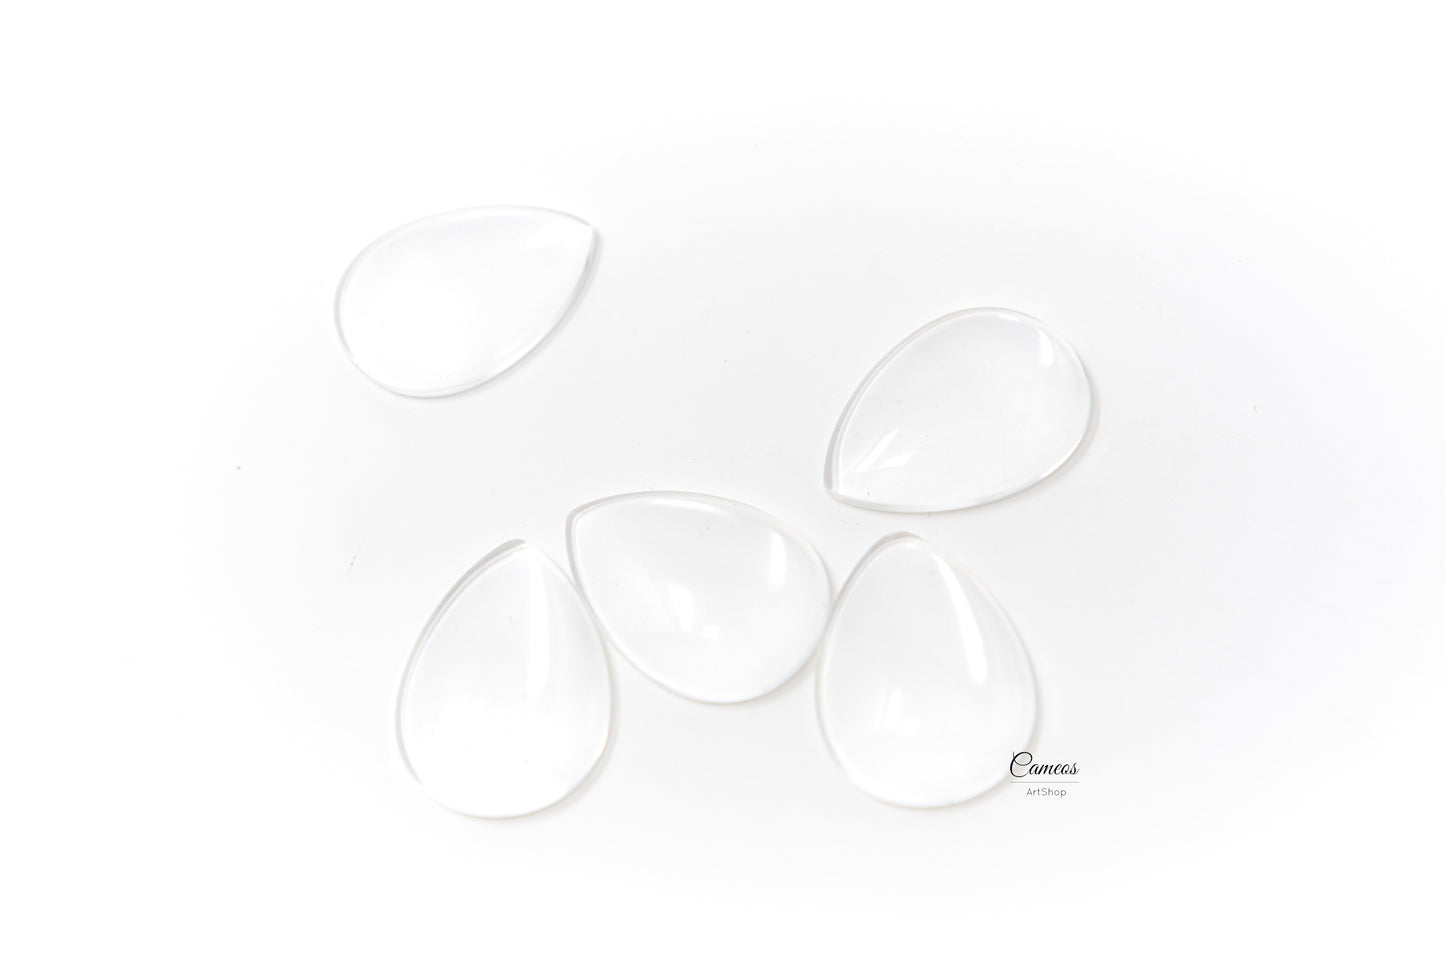 20 pcs Teardrop Shape Clear Glass Cabochons, Transparent Glass Cover, Domed Glass Cabochon 18x25mm